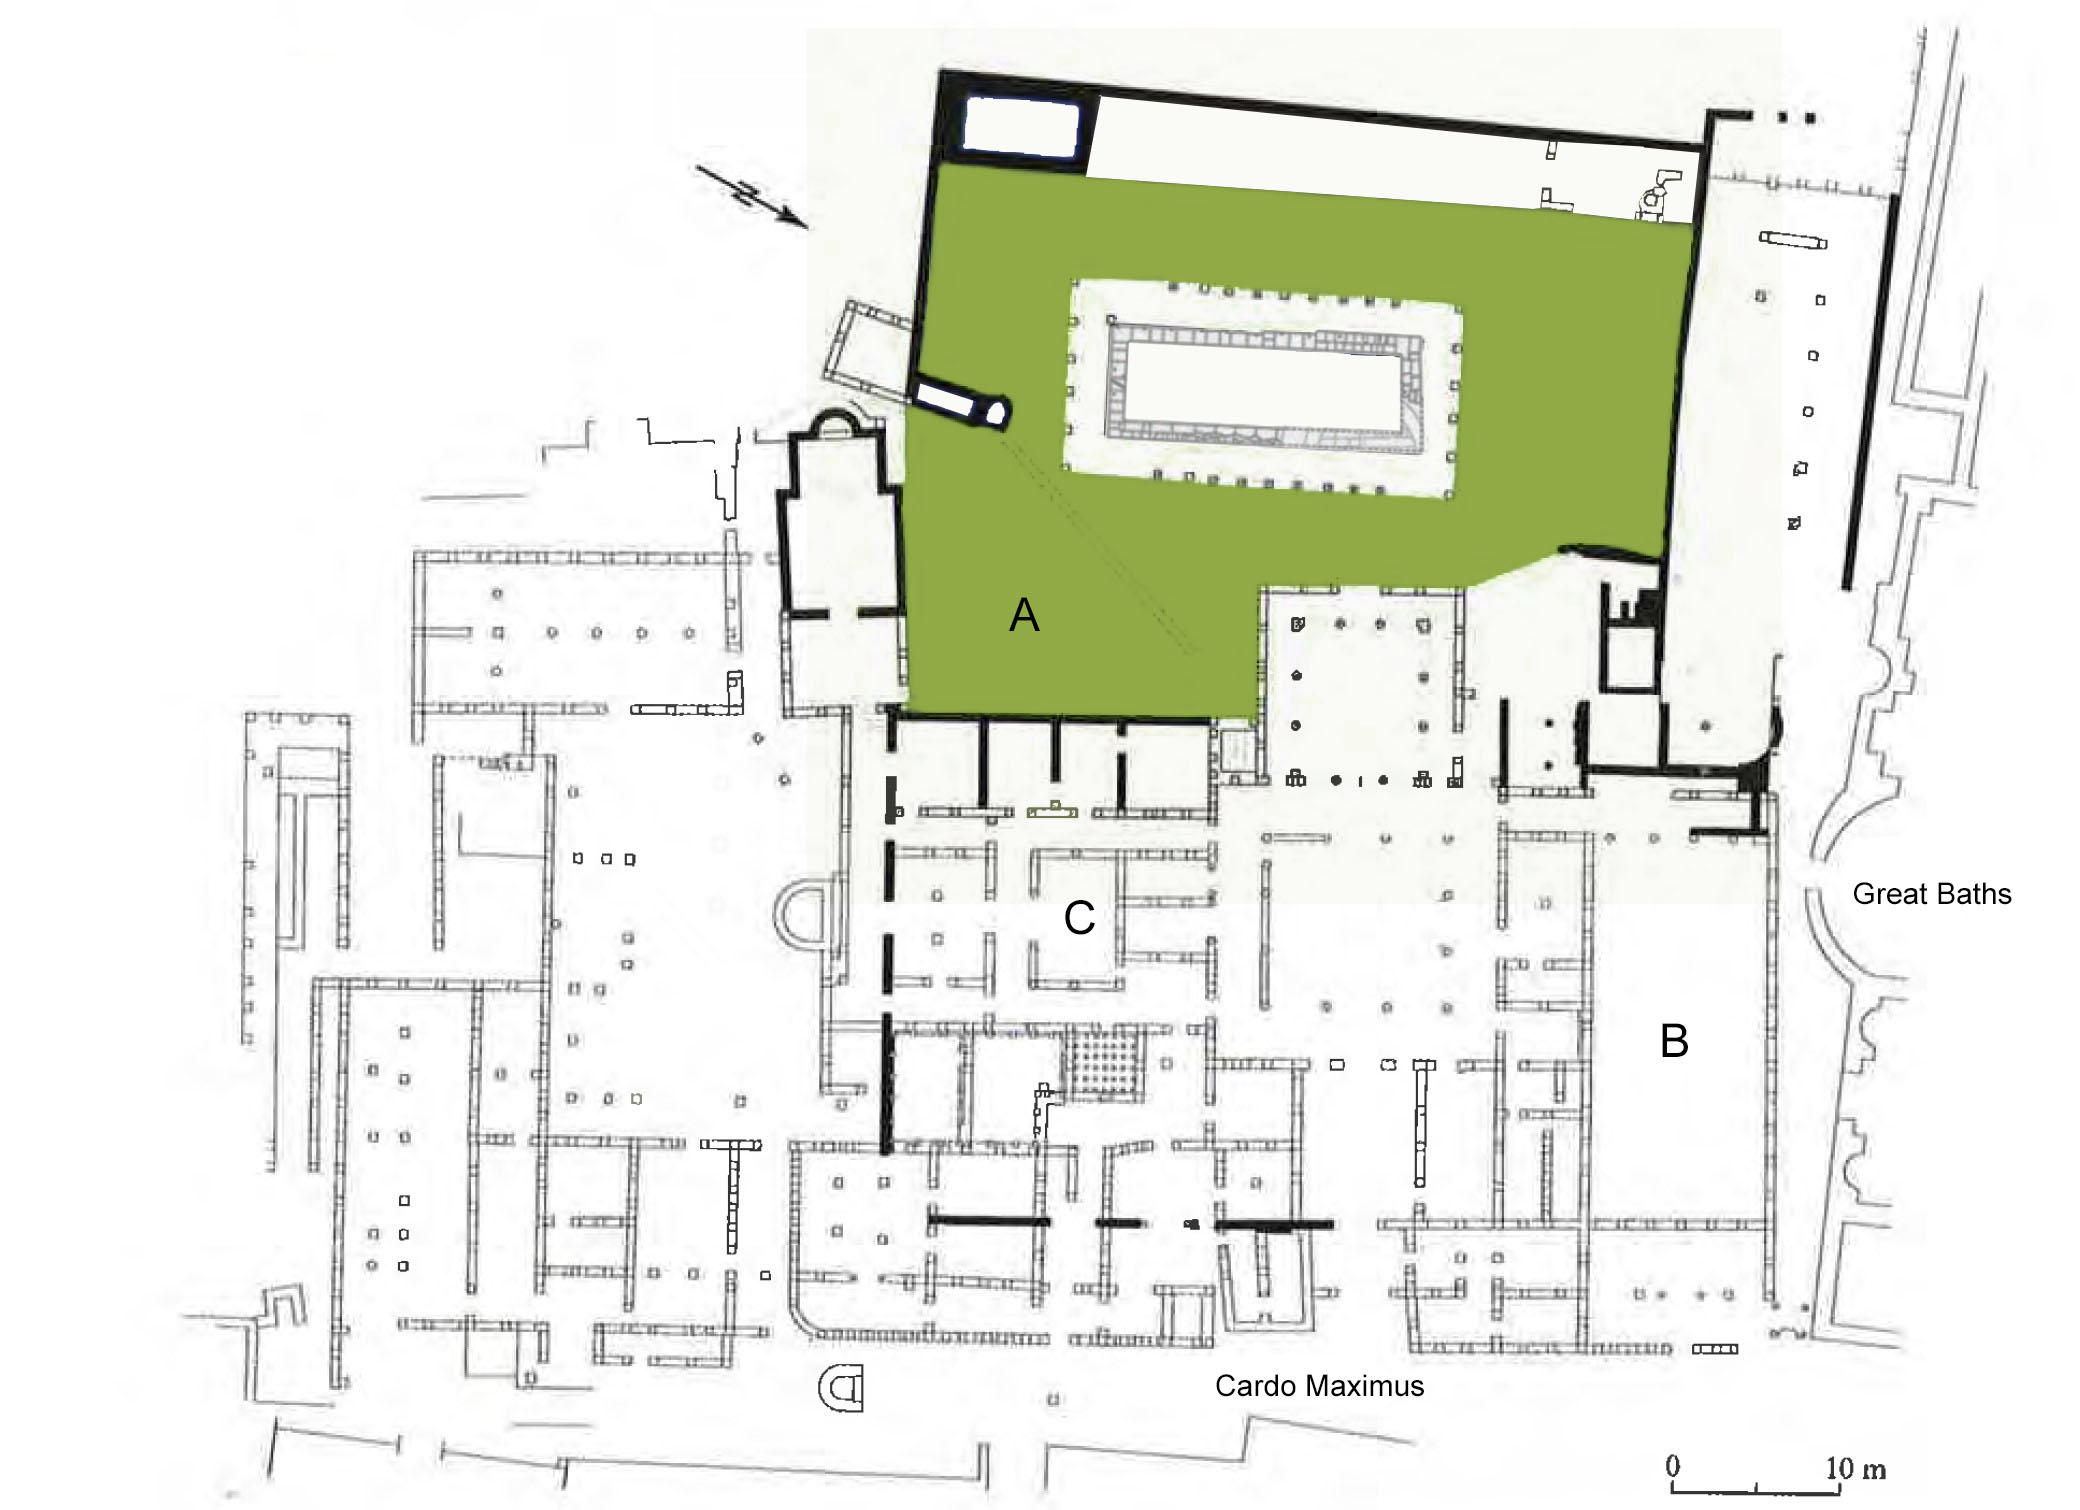 Plan of the Small Baths